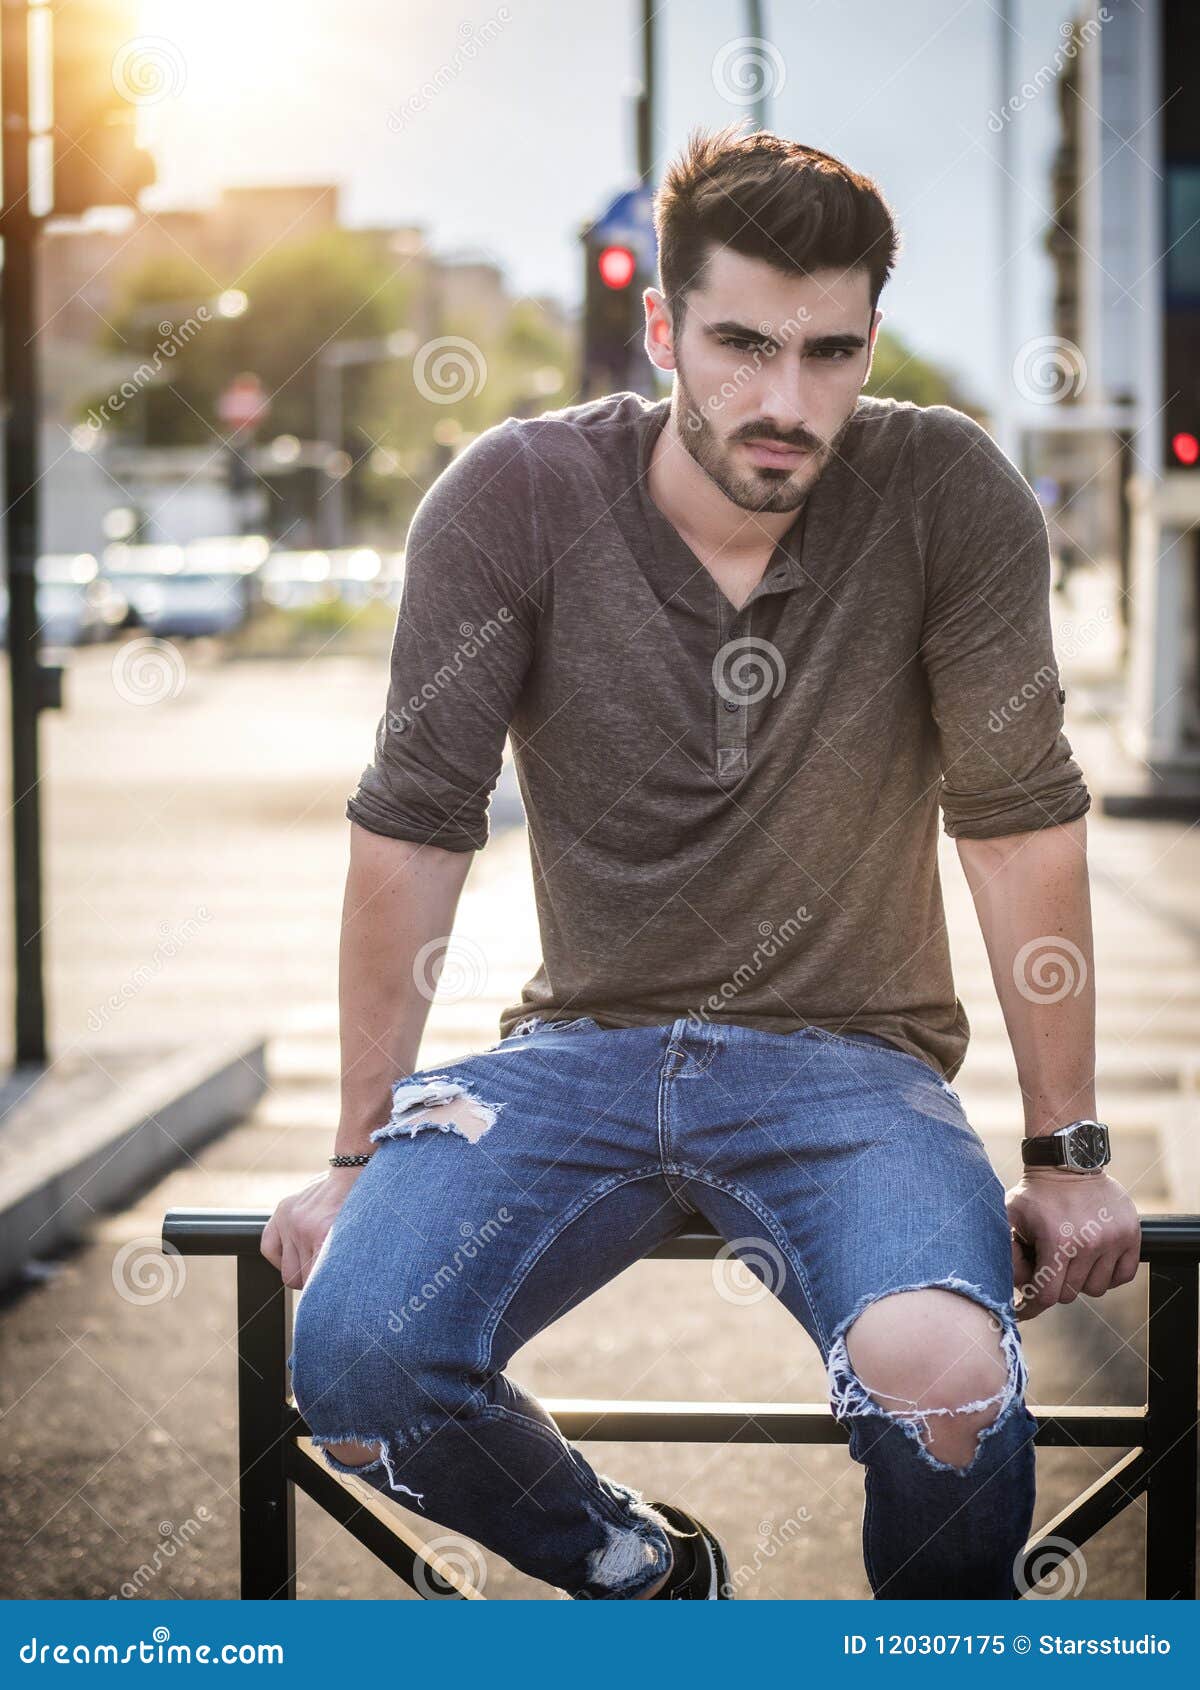 Attractive Young Man Portrait in City Street Stock Image - Image of ...